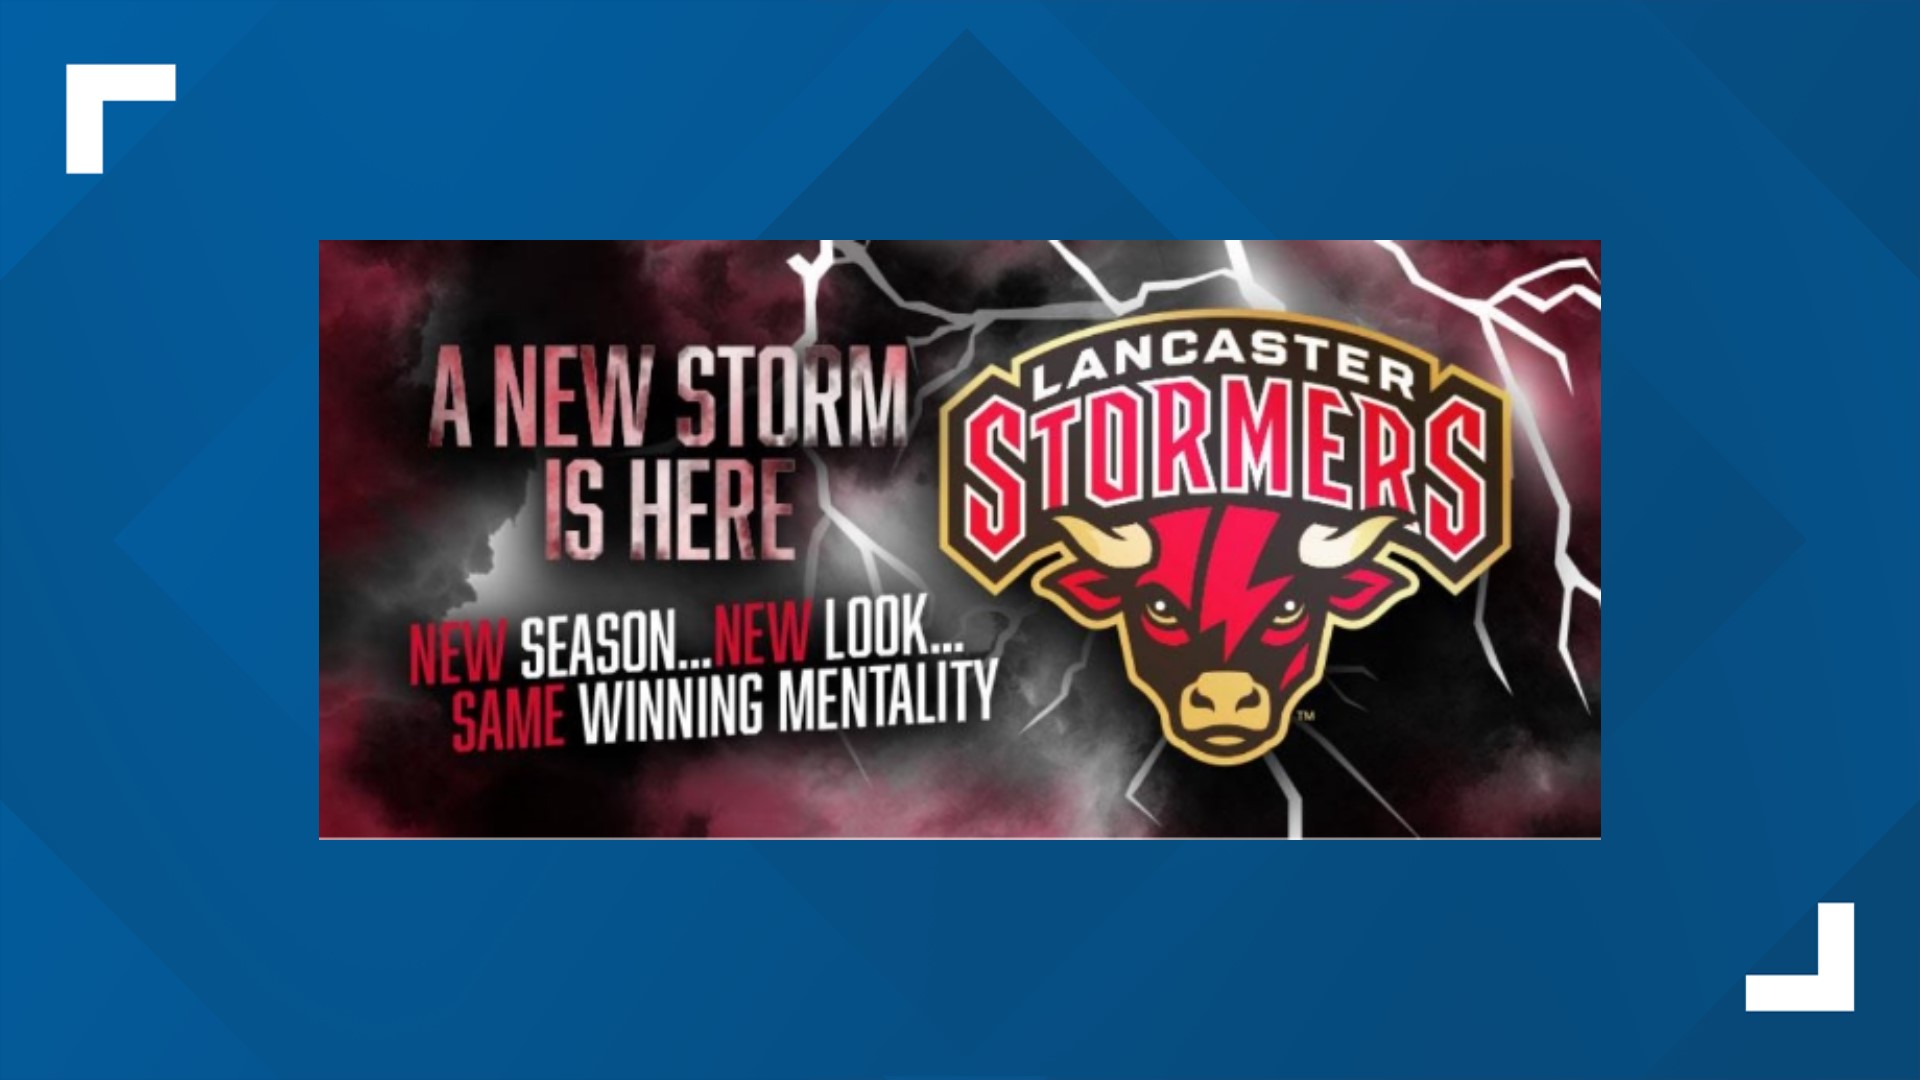 The Lancaster Stormers are going for a three-peat Atlantic League championship after a busy offseason.